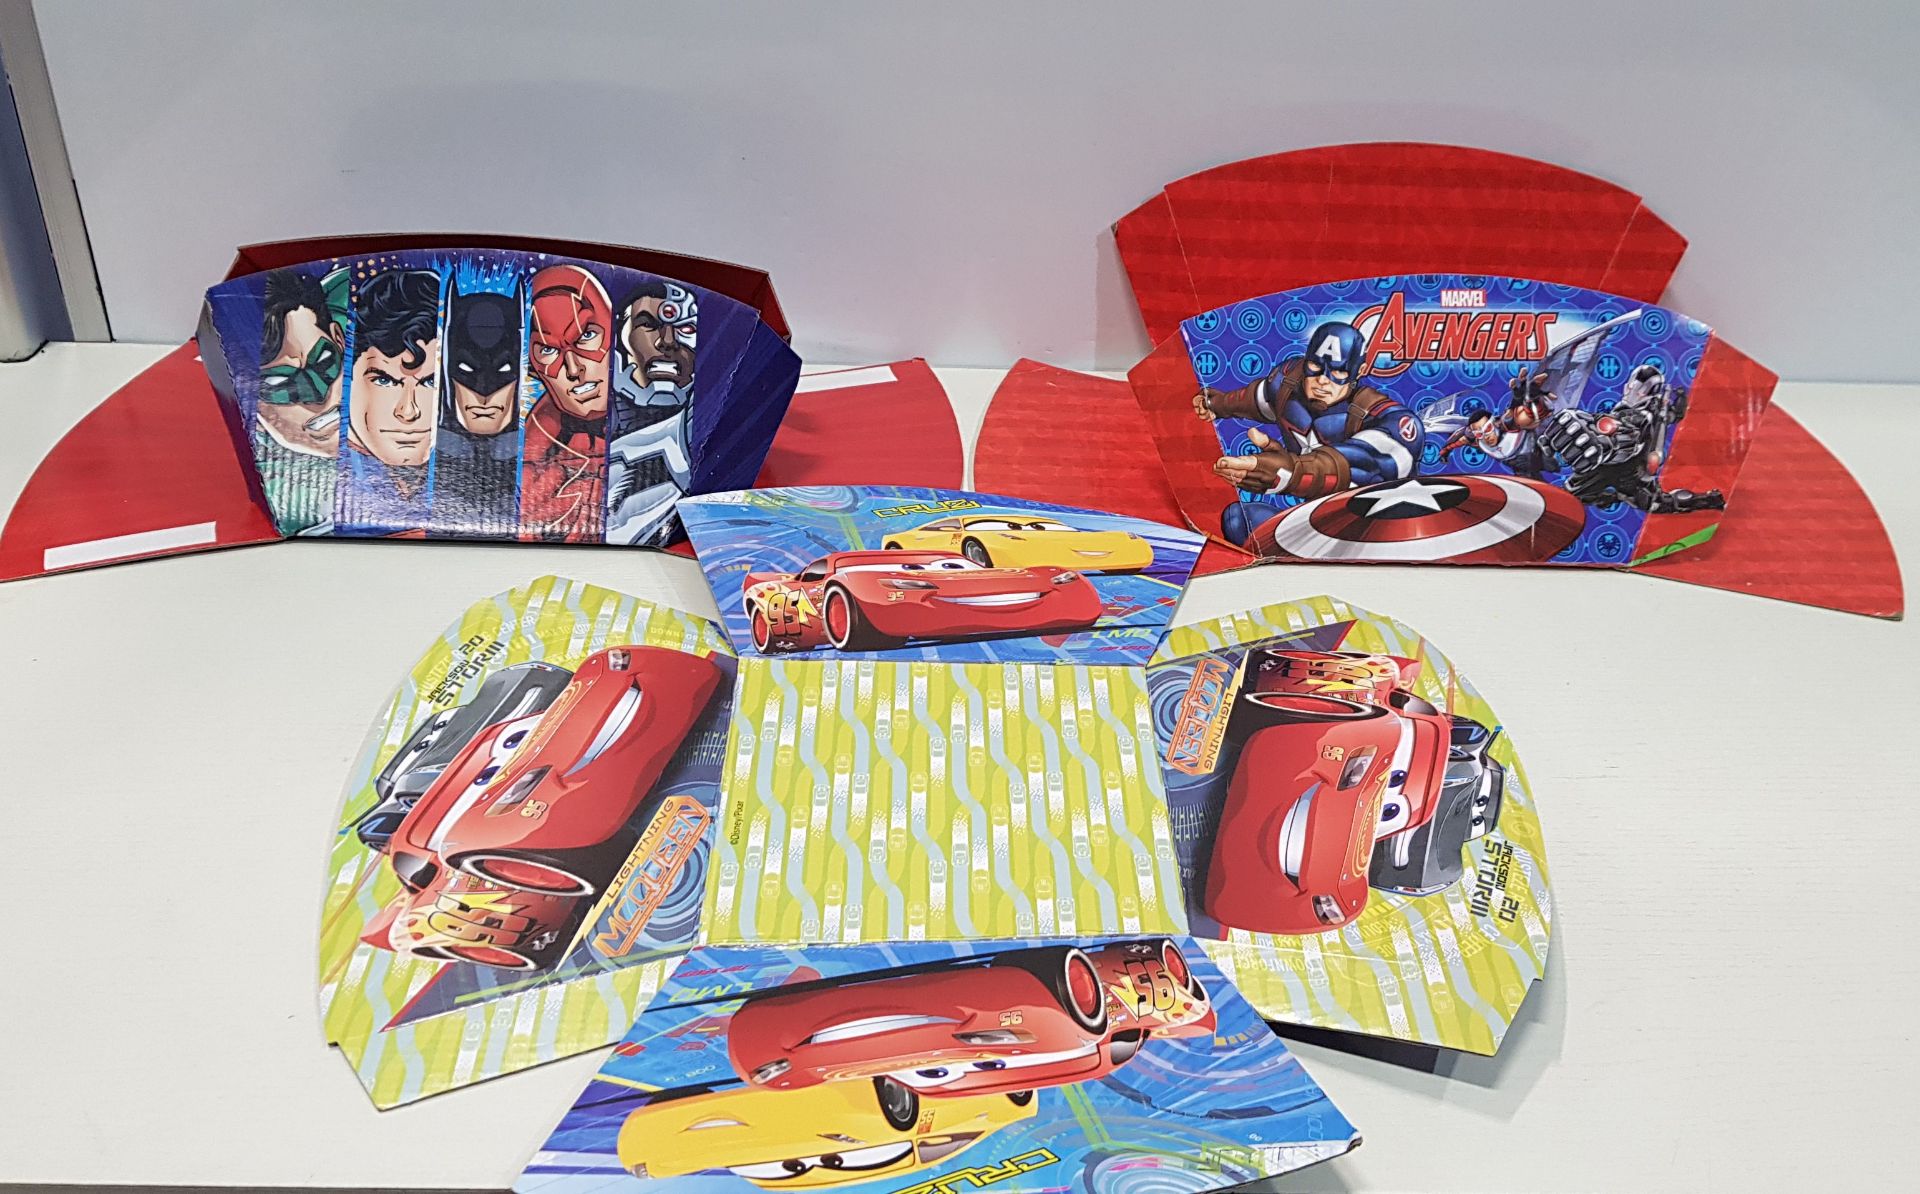 720 X BRAND NEW CARDBOARD FOLD UP PARTY BOWLS IN VARIOUS DESIGNS I.E AVENGERS - JUSTICE LEAGUE AND